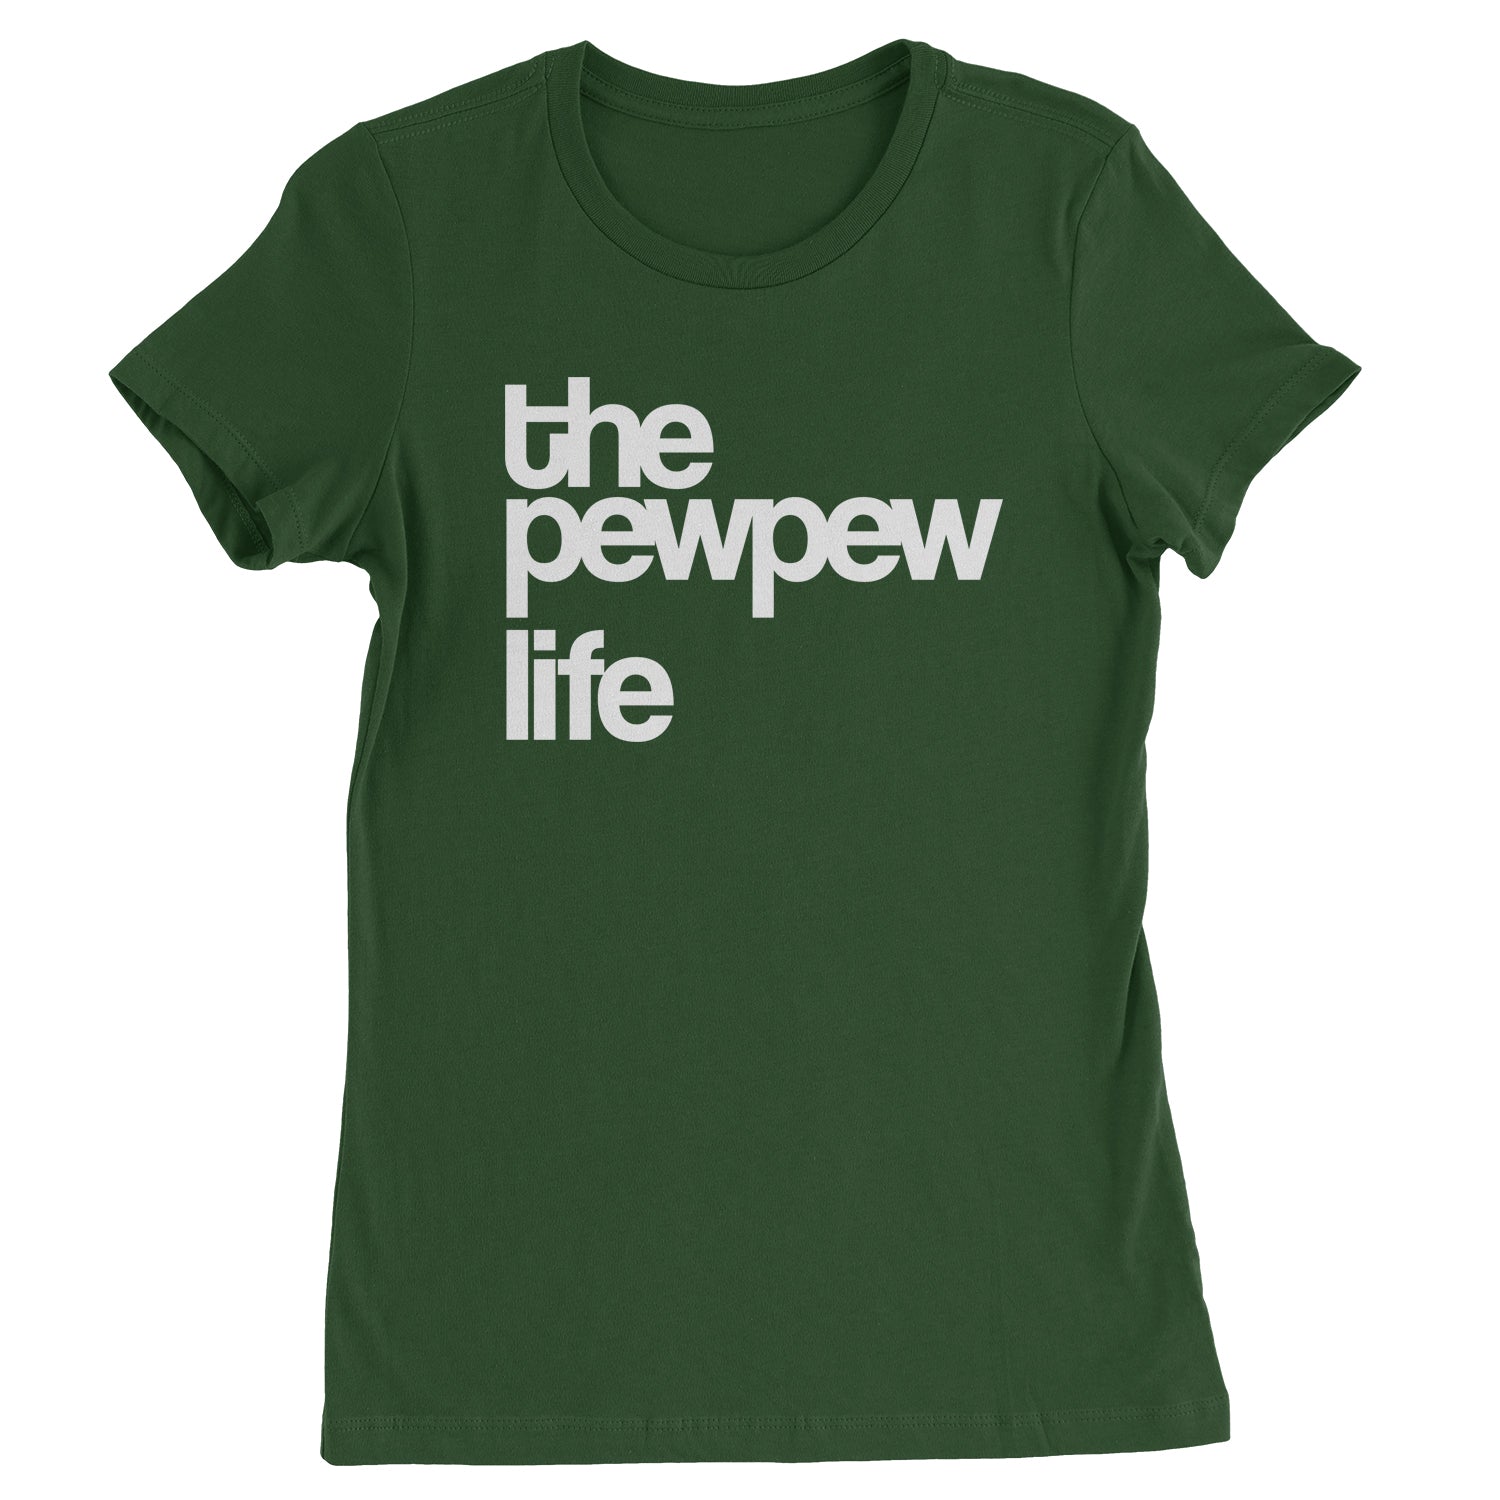 The PewPew Pew Pew Life Gun Rights Womens T-shirt #expressiontees by Expression Tees